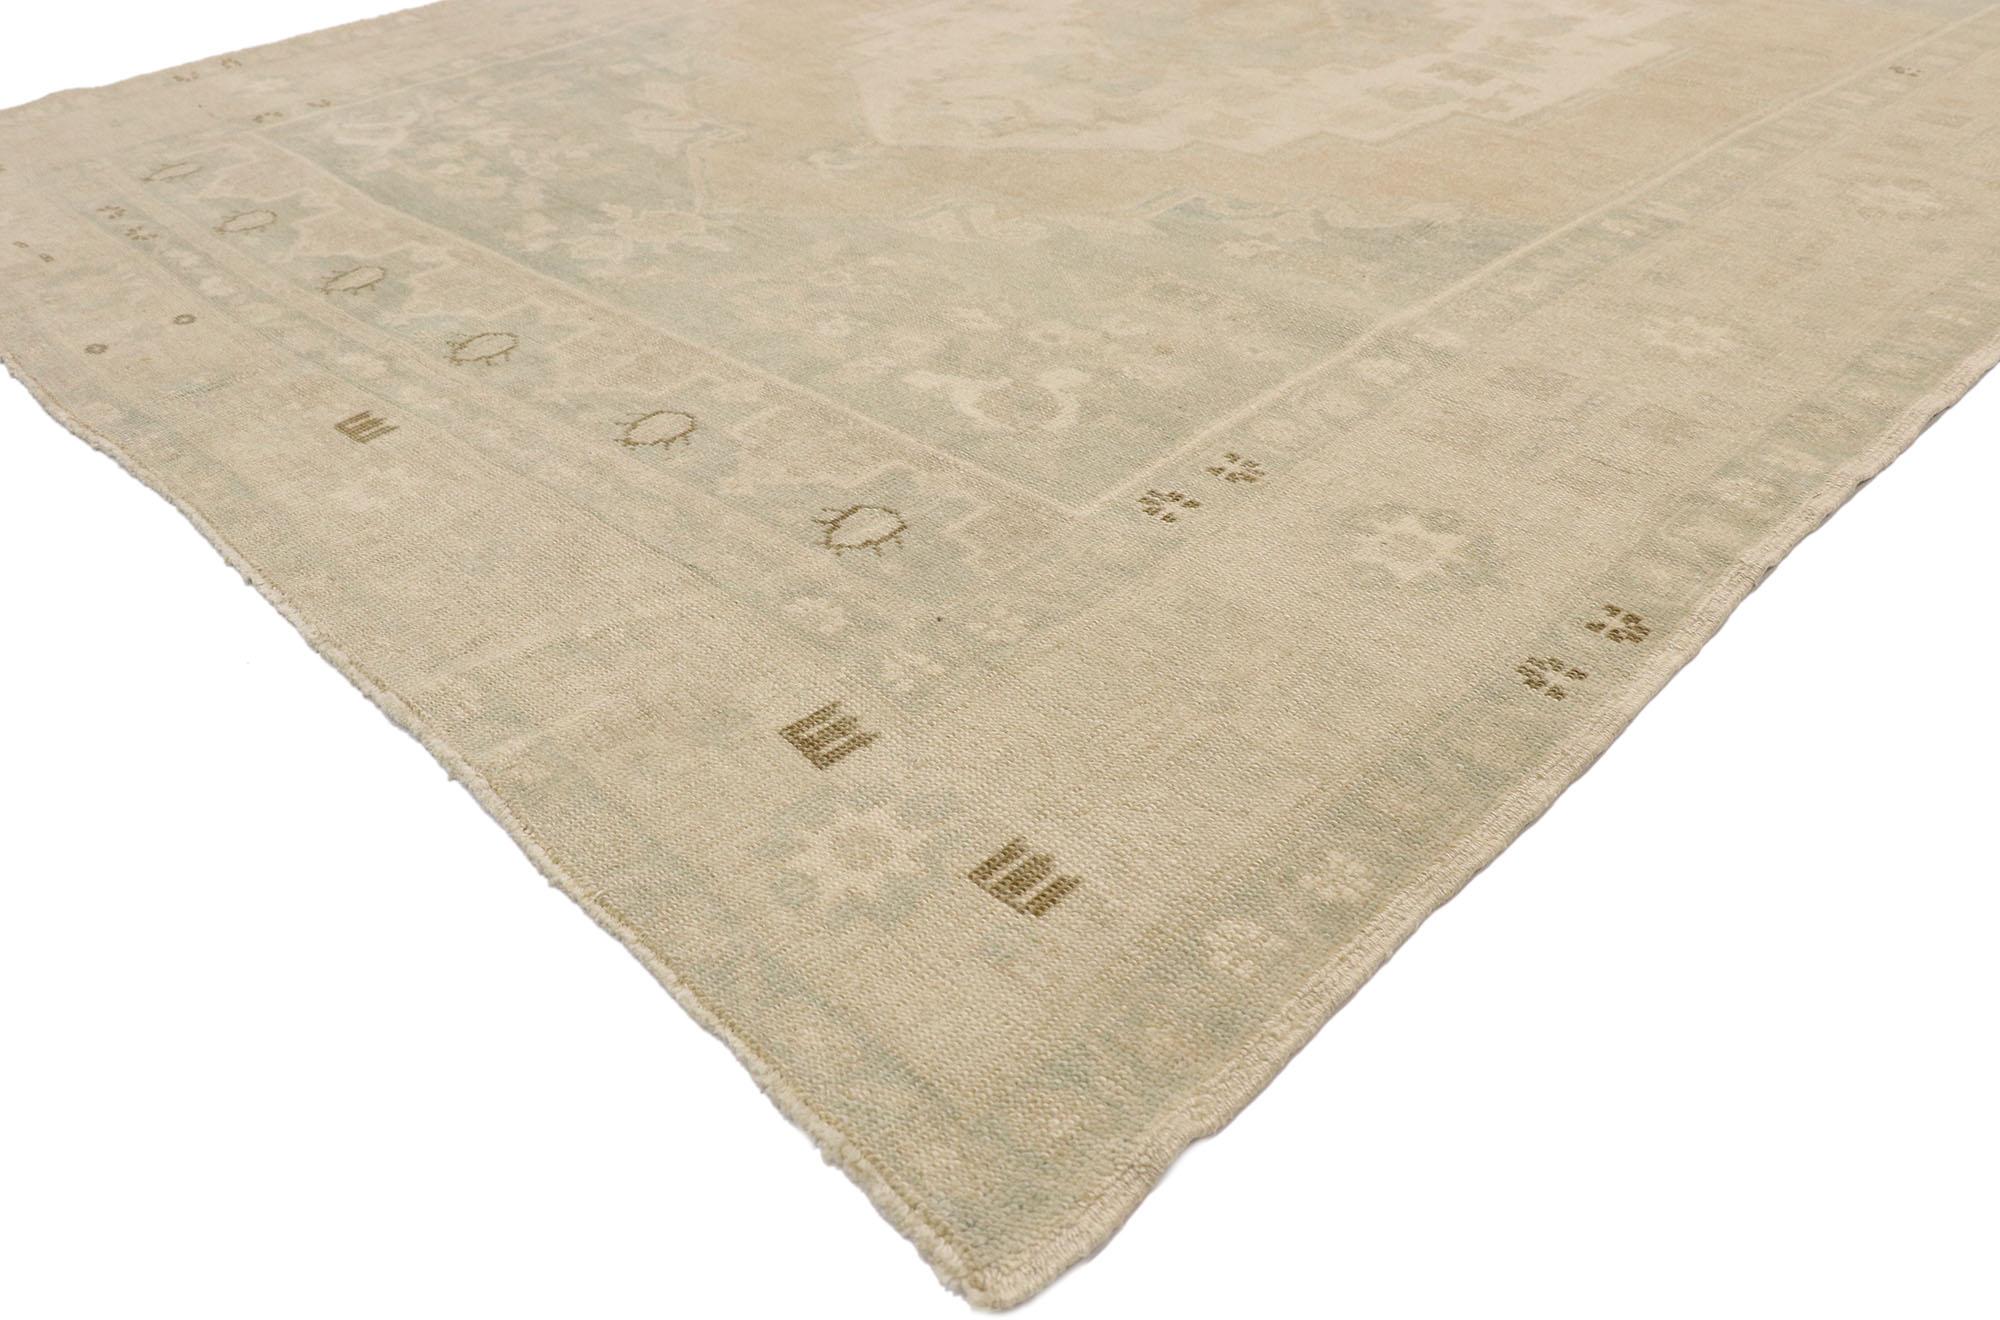 52809 Muted Vintage Turkish Oushak Rug, 06'02 x 09'01.
Subtle sophistication meets nostalgic charm in this hand knotted wool vintage Turkish Oushak rug. The faded botanical design and neutral earth-tone colors woven into this piece work together